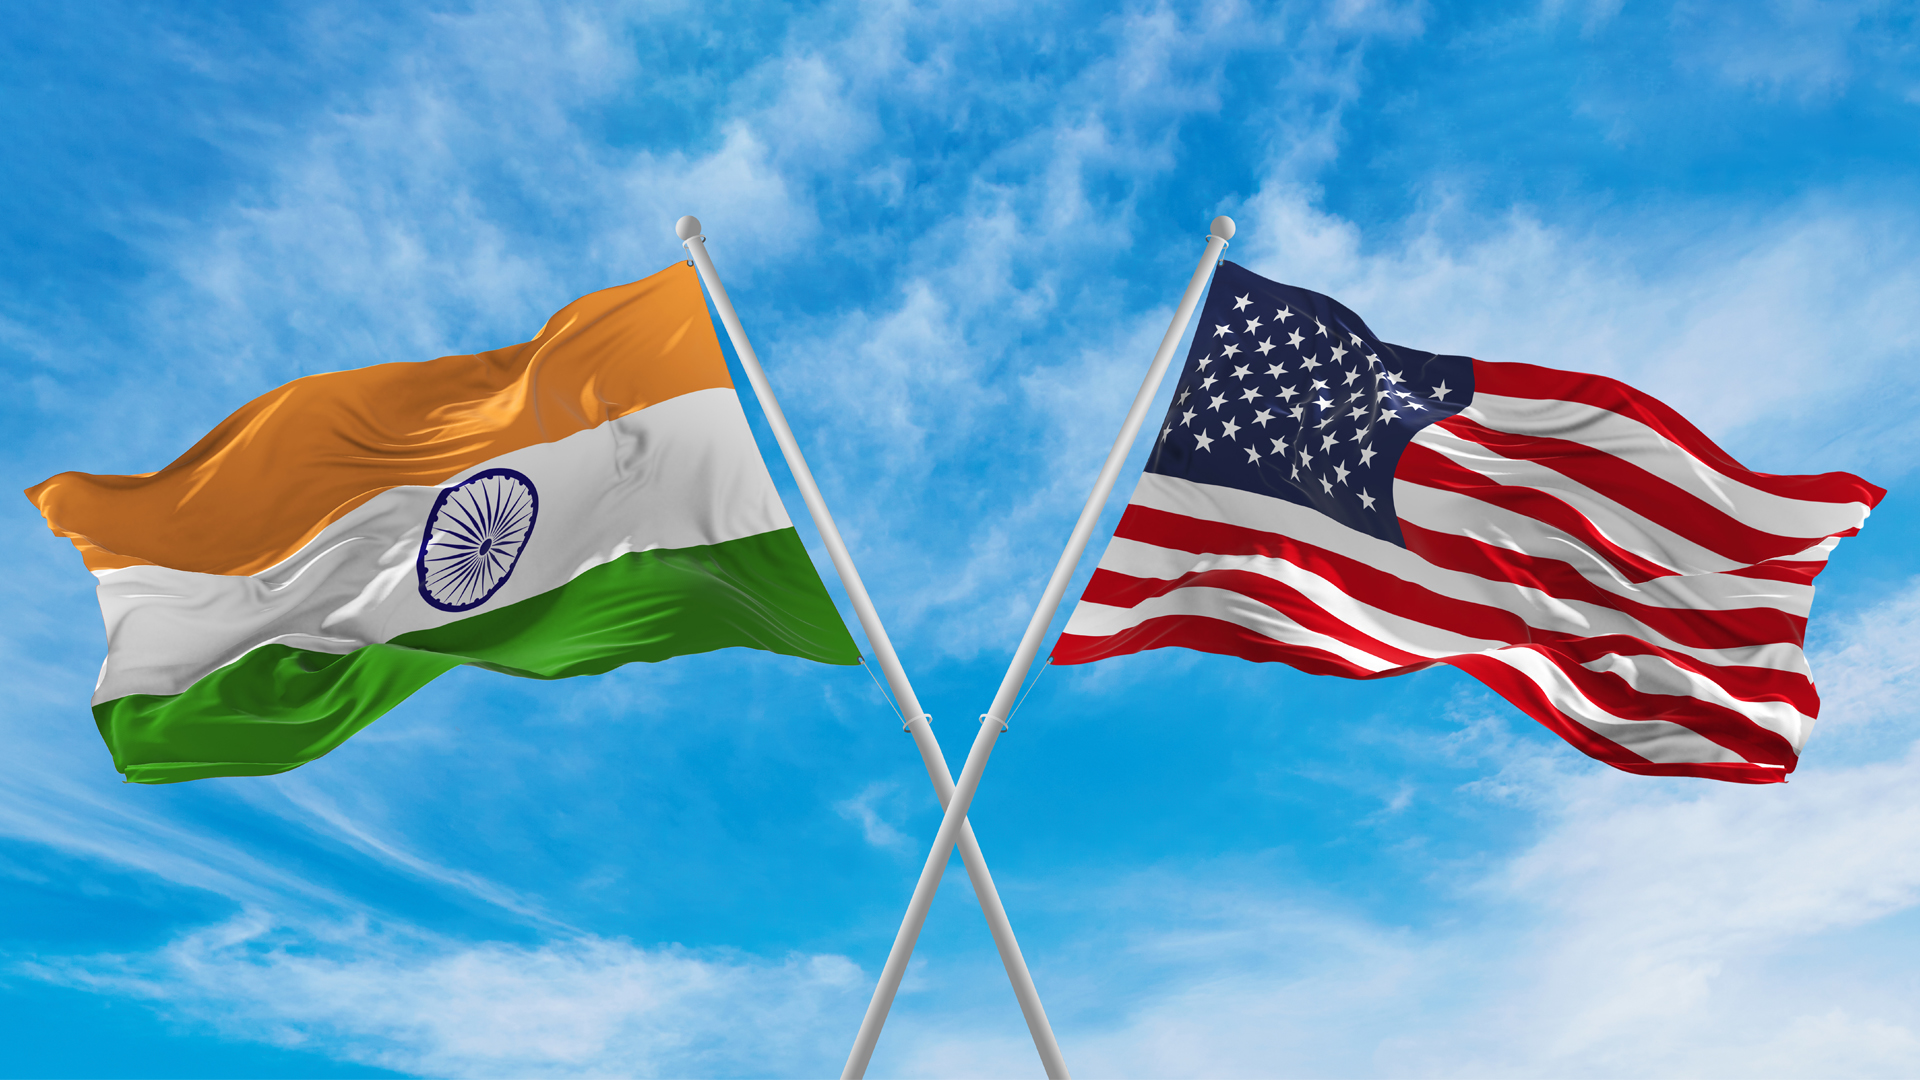 Crossed national flags of India and United States of America flag waving in the wind at cloudy blue sky.